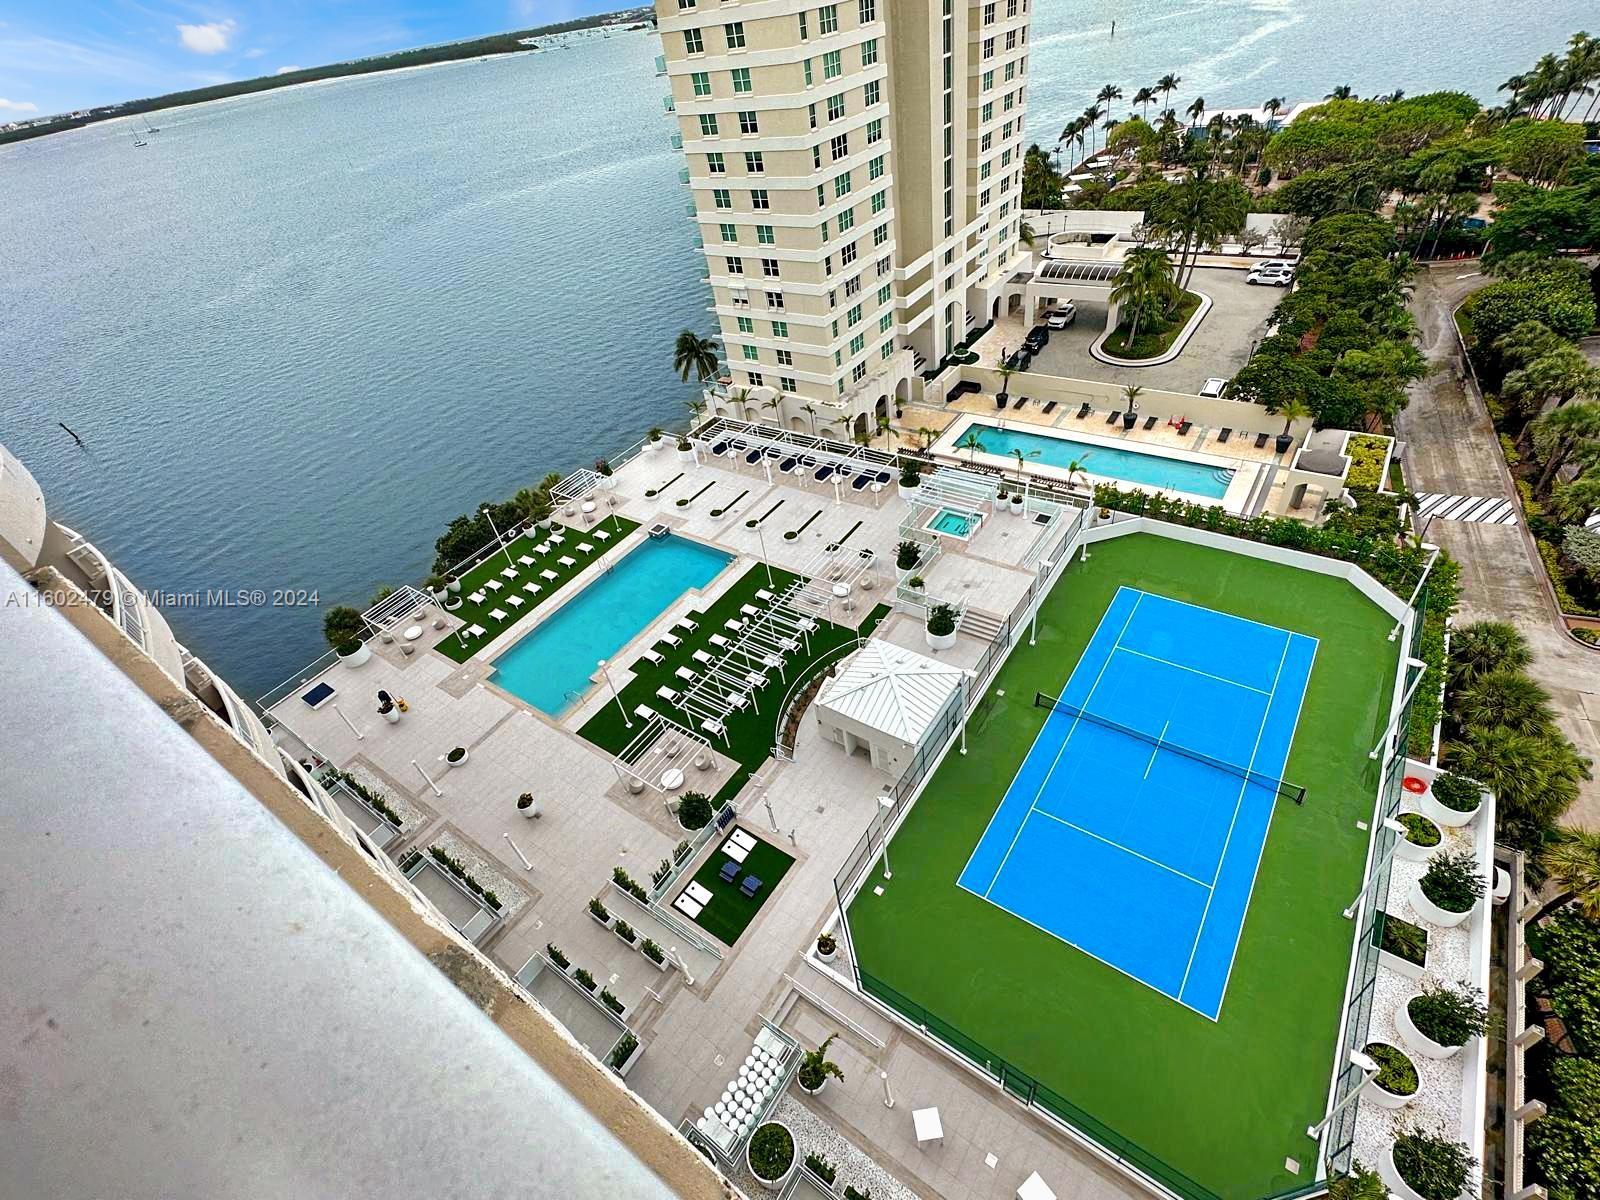 Discover a fantastic opportunity in Brickell Key, Miami's premier neighborhood. This unit offers breathtaking water and skyline views from the 17th floor. Perfect for those seeking a vibrant urban lifestyle, the unit features a spacious living area and an open balcony. The building boasts newly renovated, top-notch amenities including a heated pool, gym, tennis court, BBQ area, and bike storage. Enjoy the convenience of assigned parking, valet, security, concierge, and doorman services. Located near Brickell City Centre and Mary Brickell Village, with easy access to Downtown, Wynwood, and Miami Beach. Ideal for renovation enthusiasts ready to create their dream home. Don't miss out on this gem!